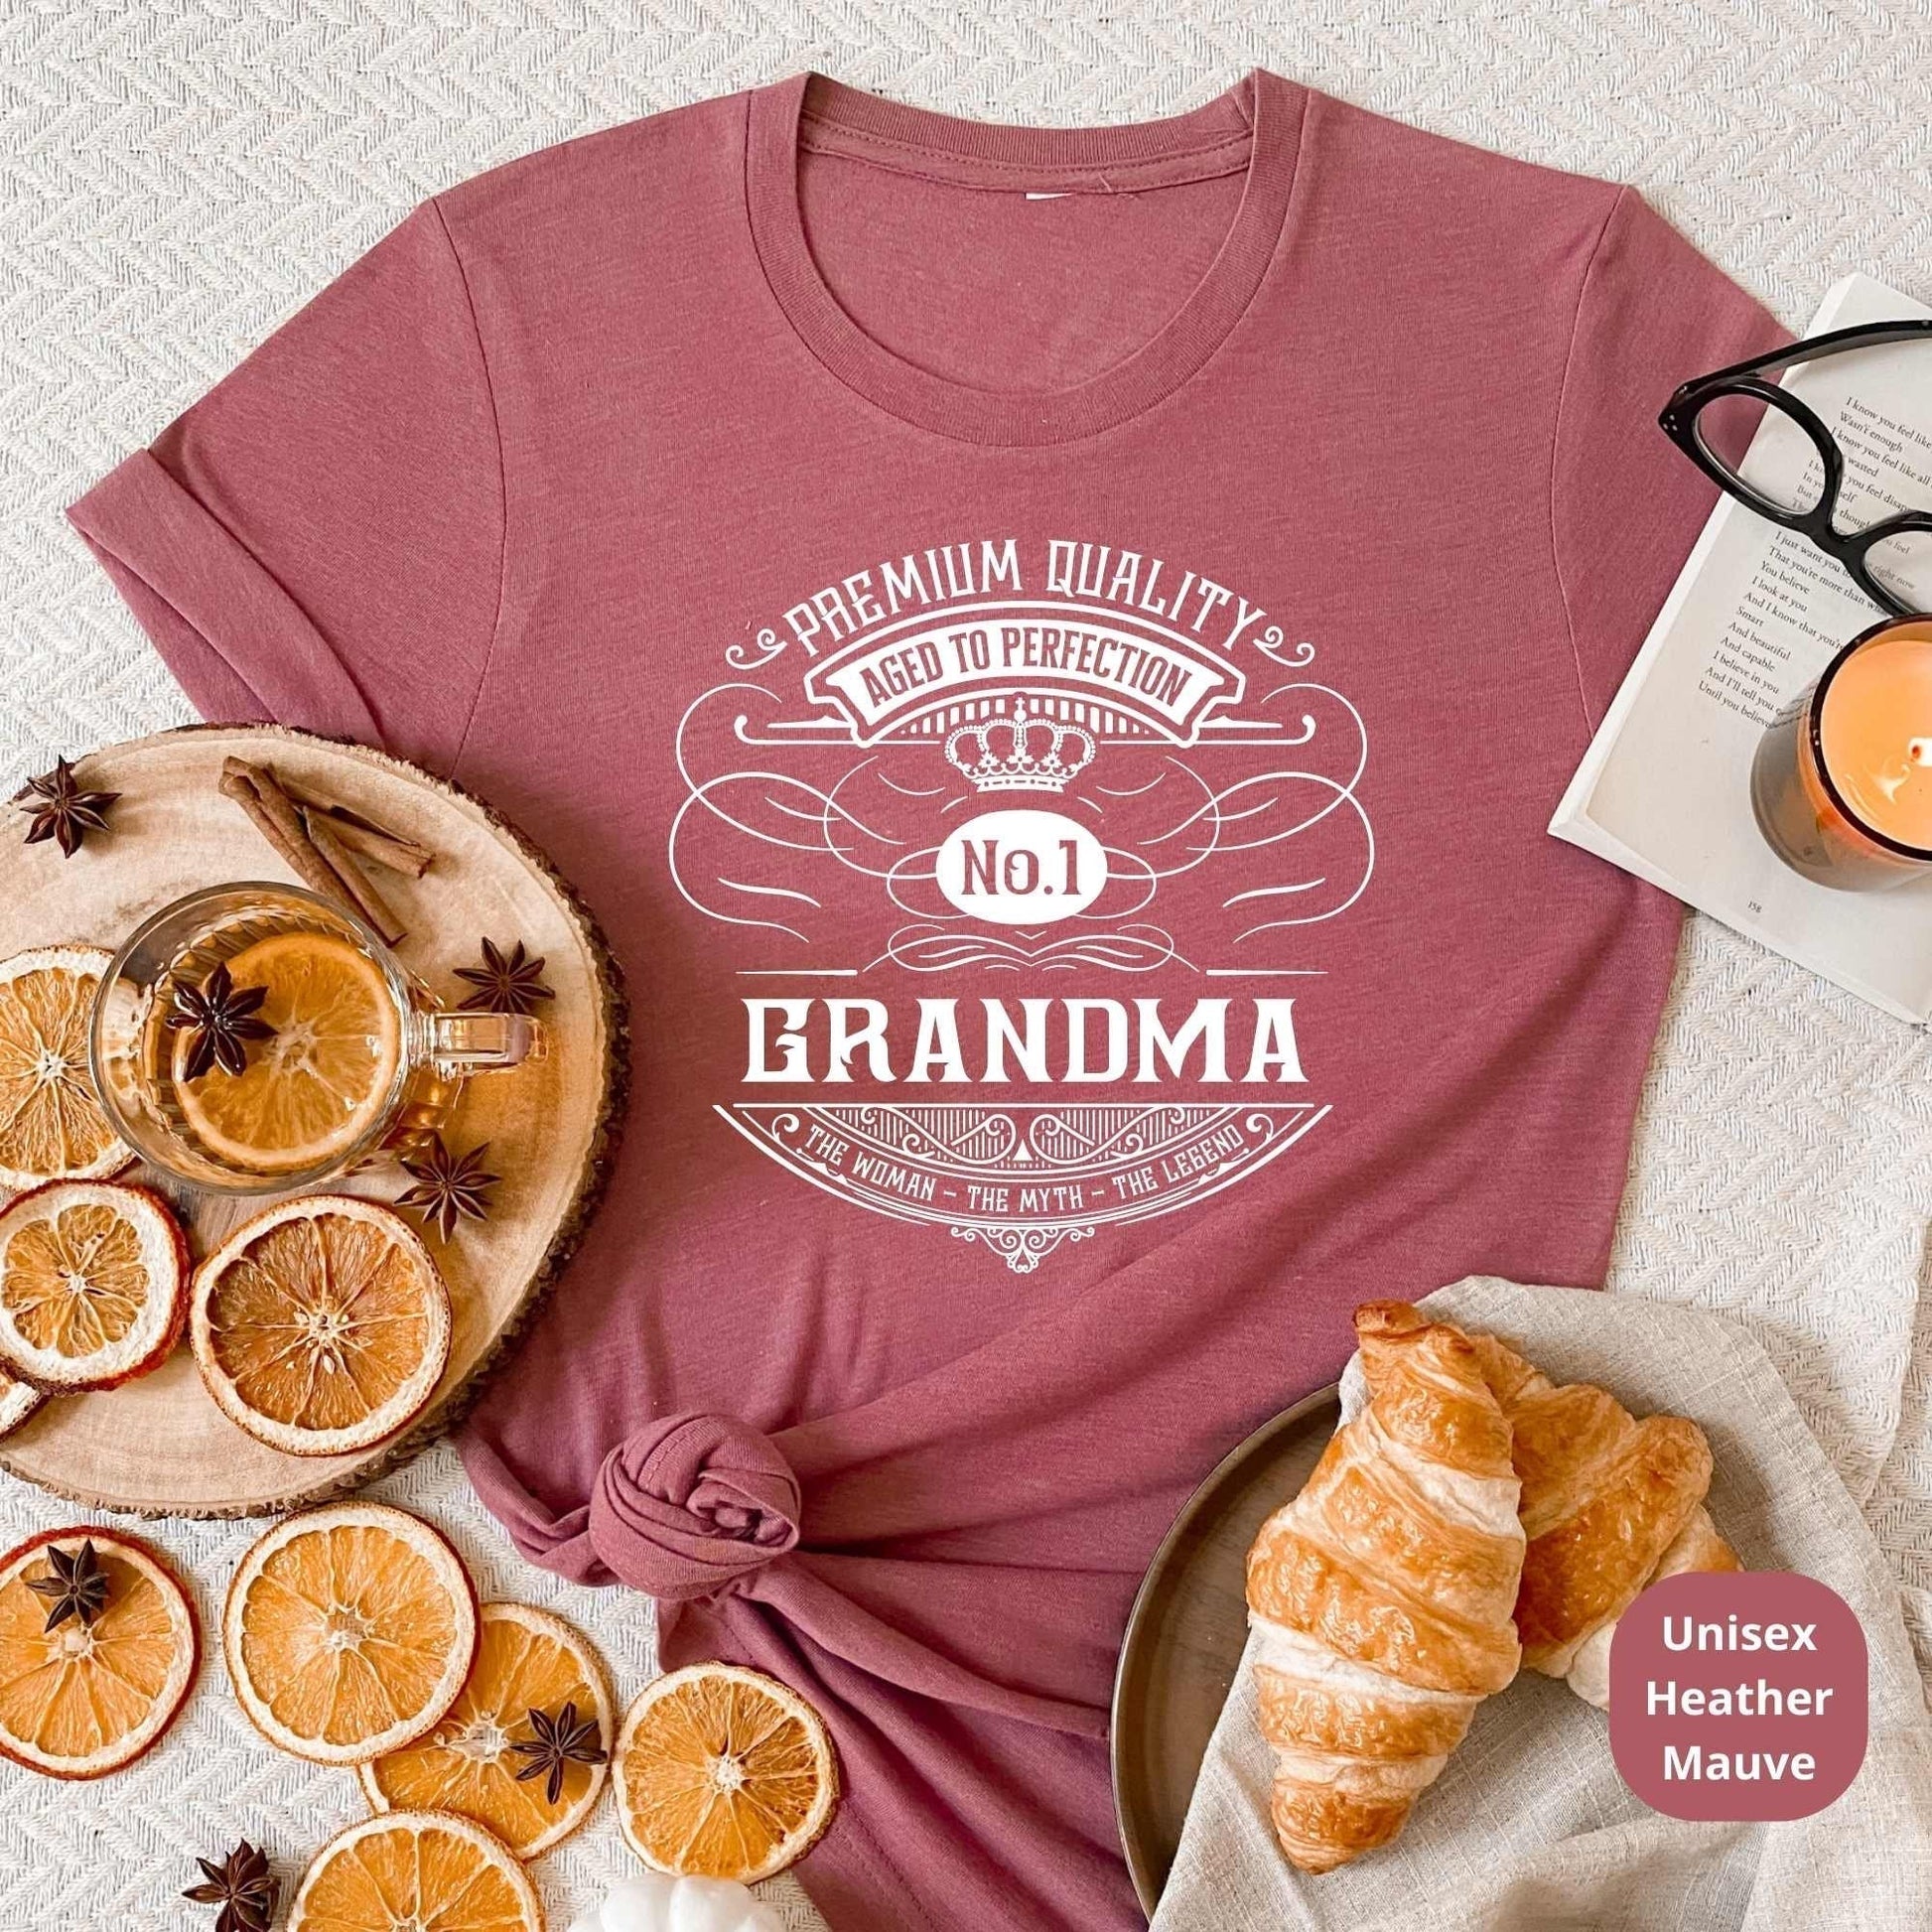 Family Reunion Matching Tees for Photos, Pregnancy Reveal Shirts, Baby Announcement Photographs, Baby Shower, Parents & Grandparents Gifts